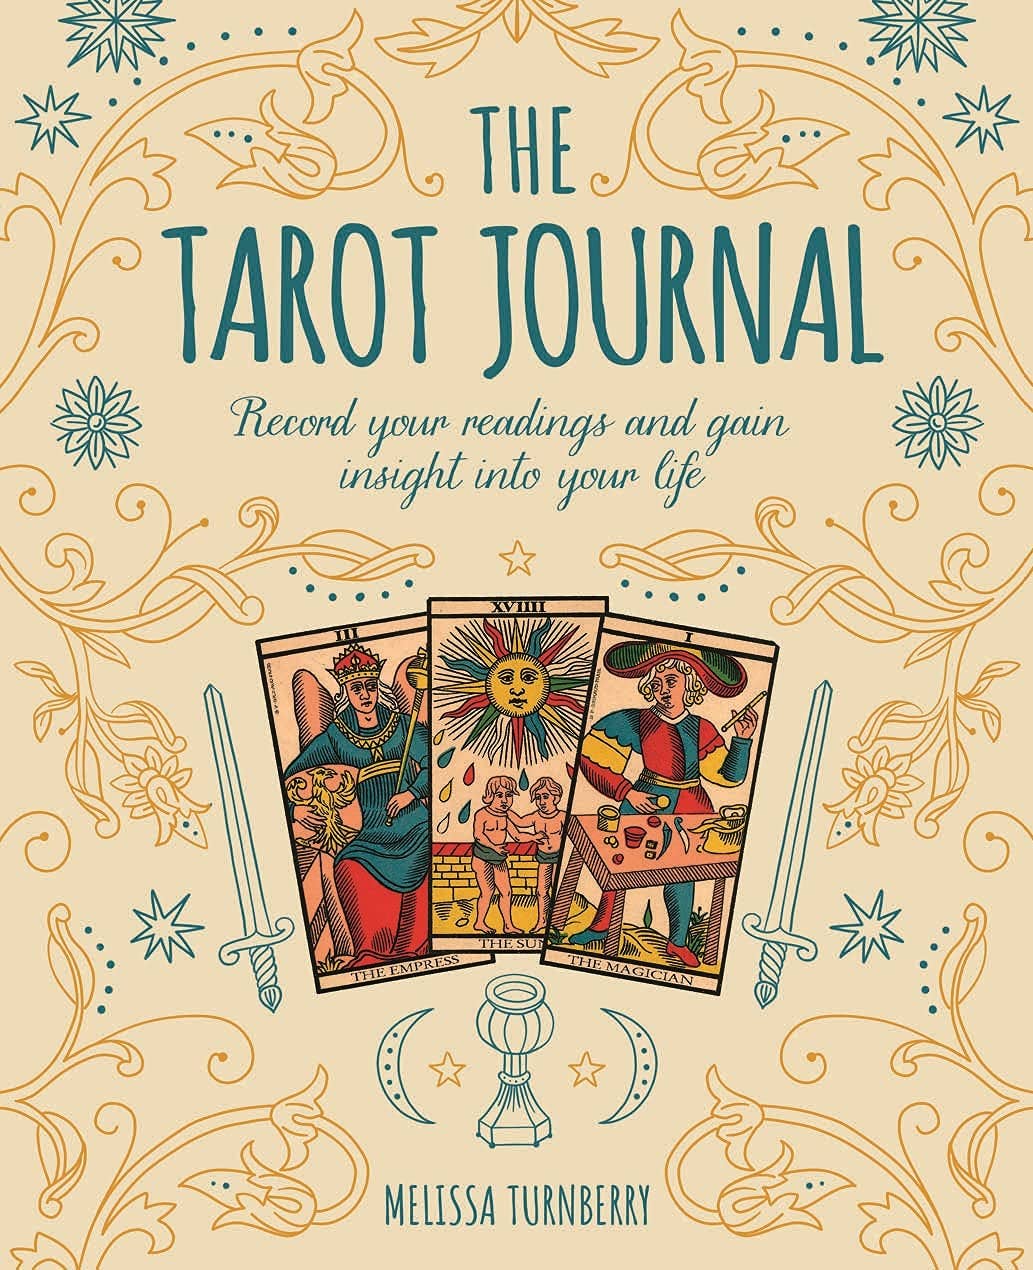 Tarot Journal: Record Your Readings & Gain Insight - Spiral Circle